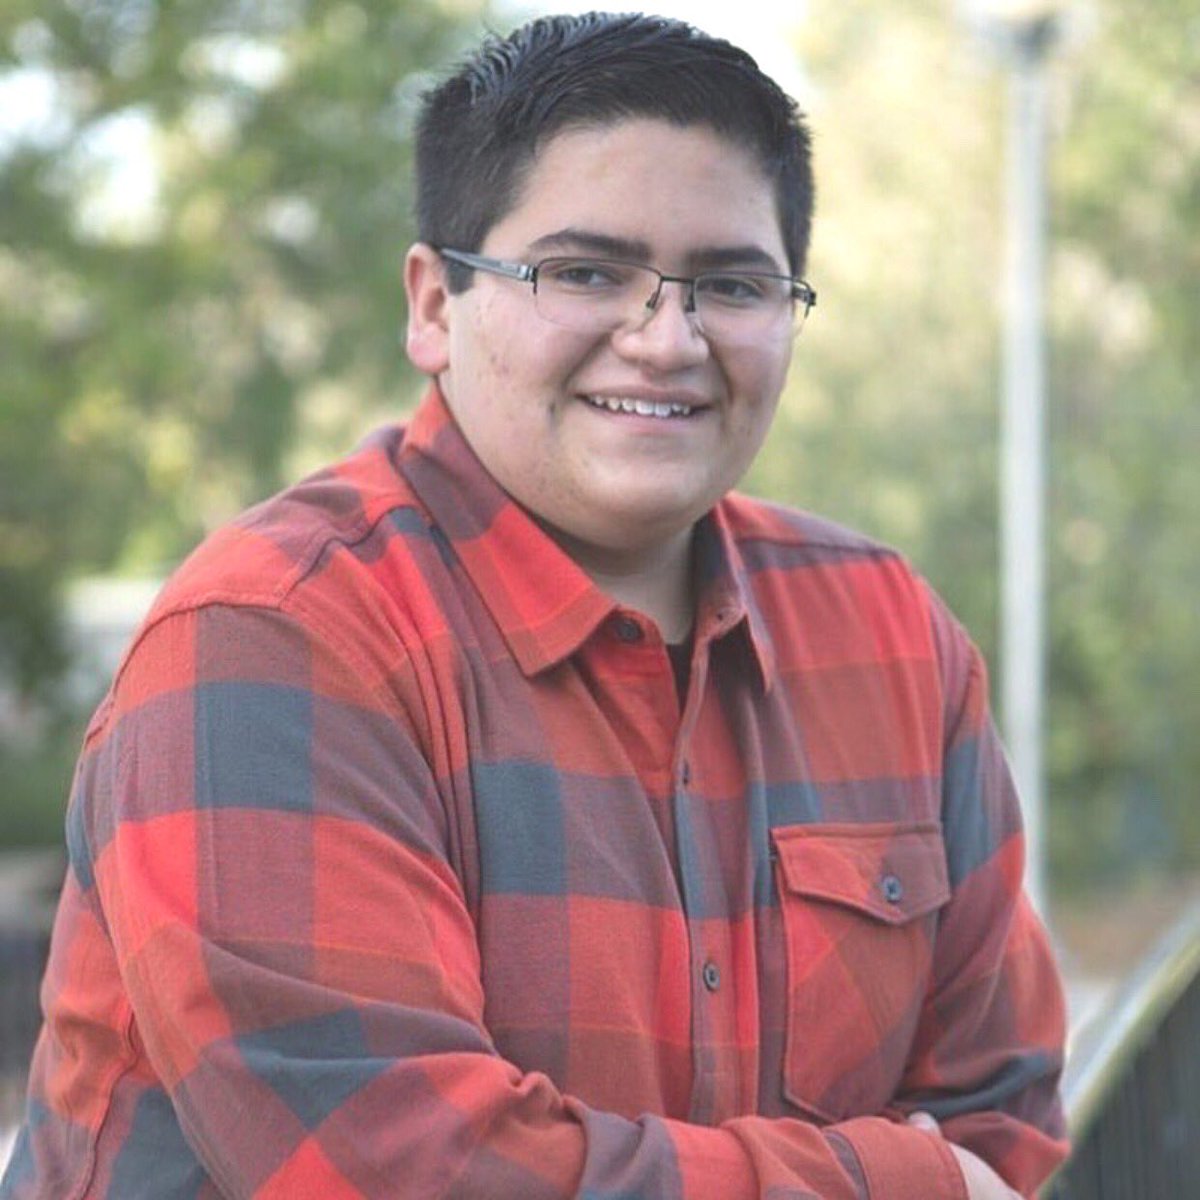 This is the Courageous Kendrick Castillo. 
Remember his courage. 
Remember him as a HERO. 
He lunged at the STEM shooter yesterday. 
He died saving others. 
3 days away from graduating. #STEMschool #STEMSchoolHighlandsRanch